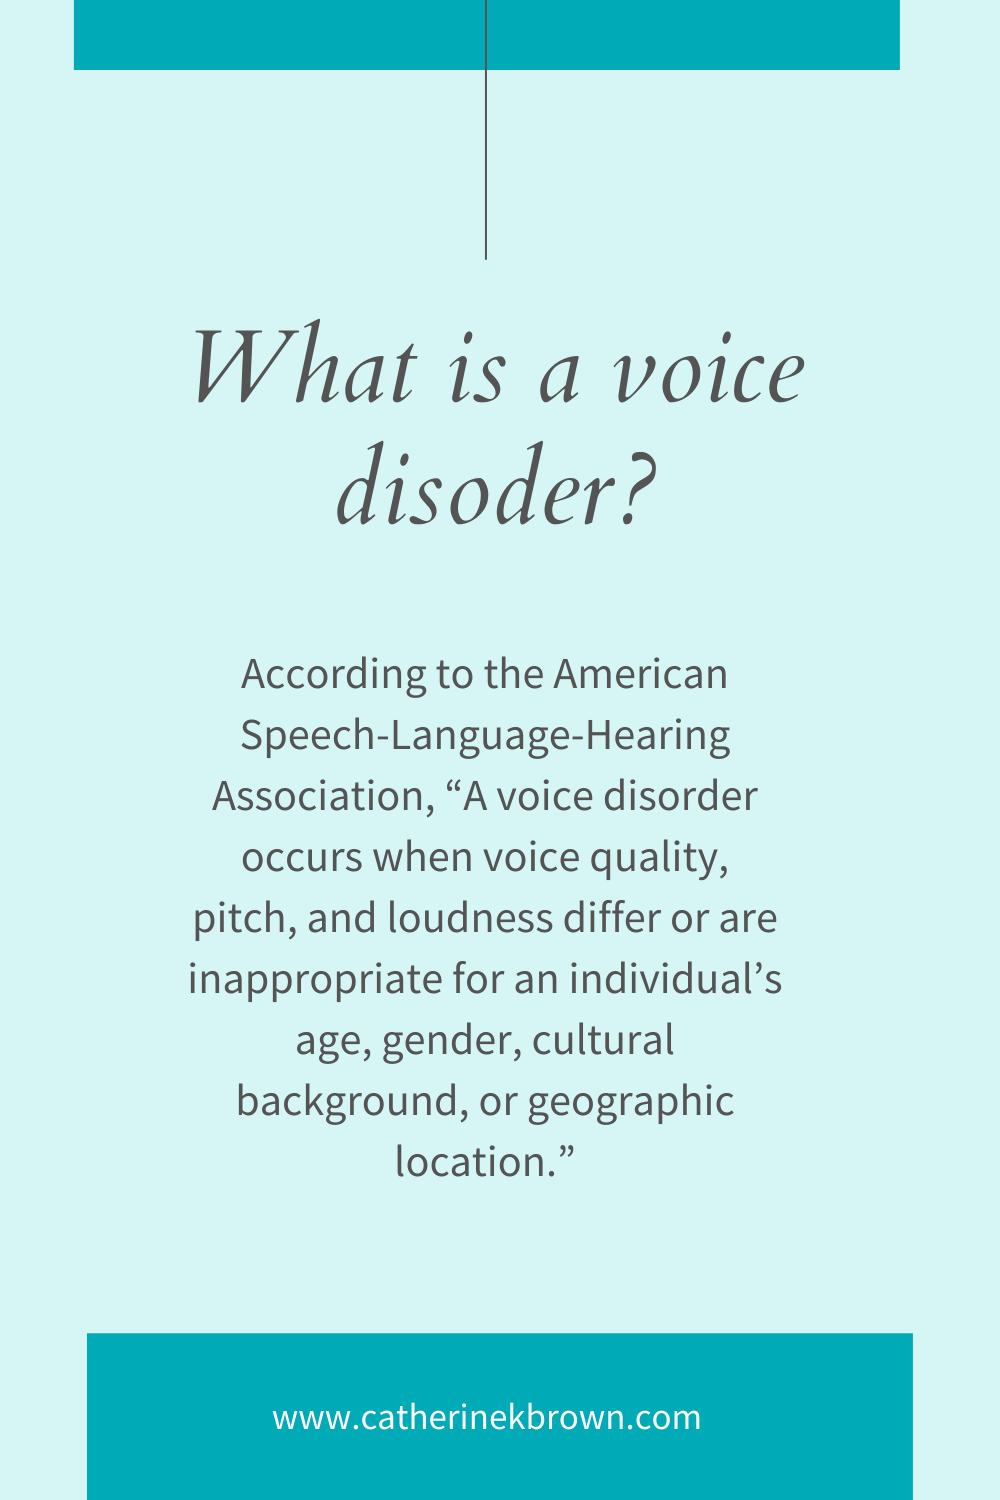 What is a voice disorder?